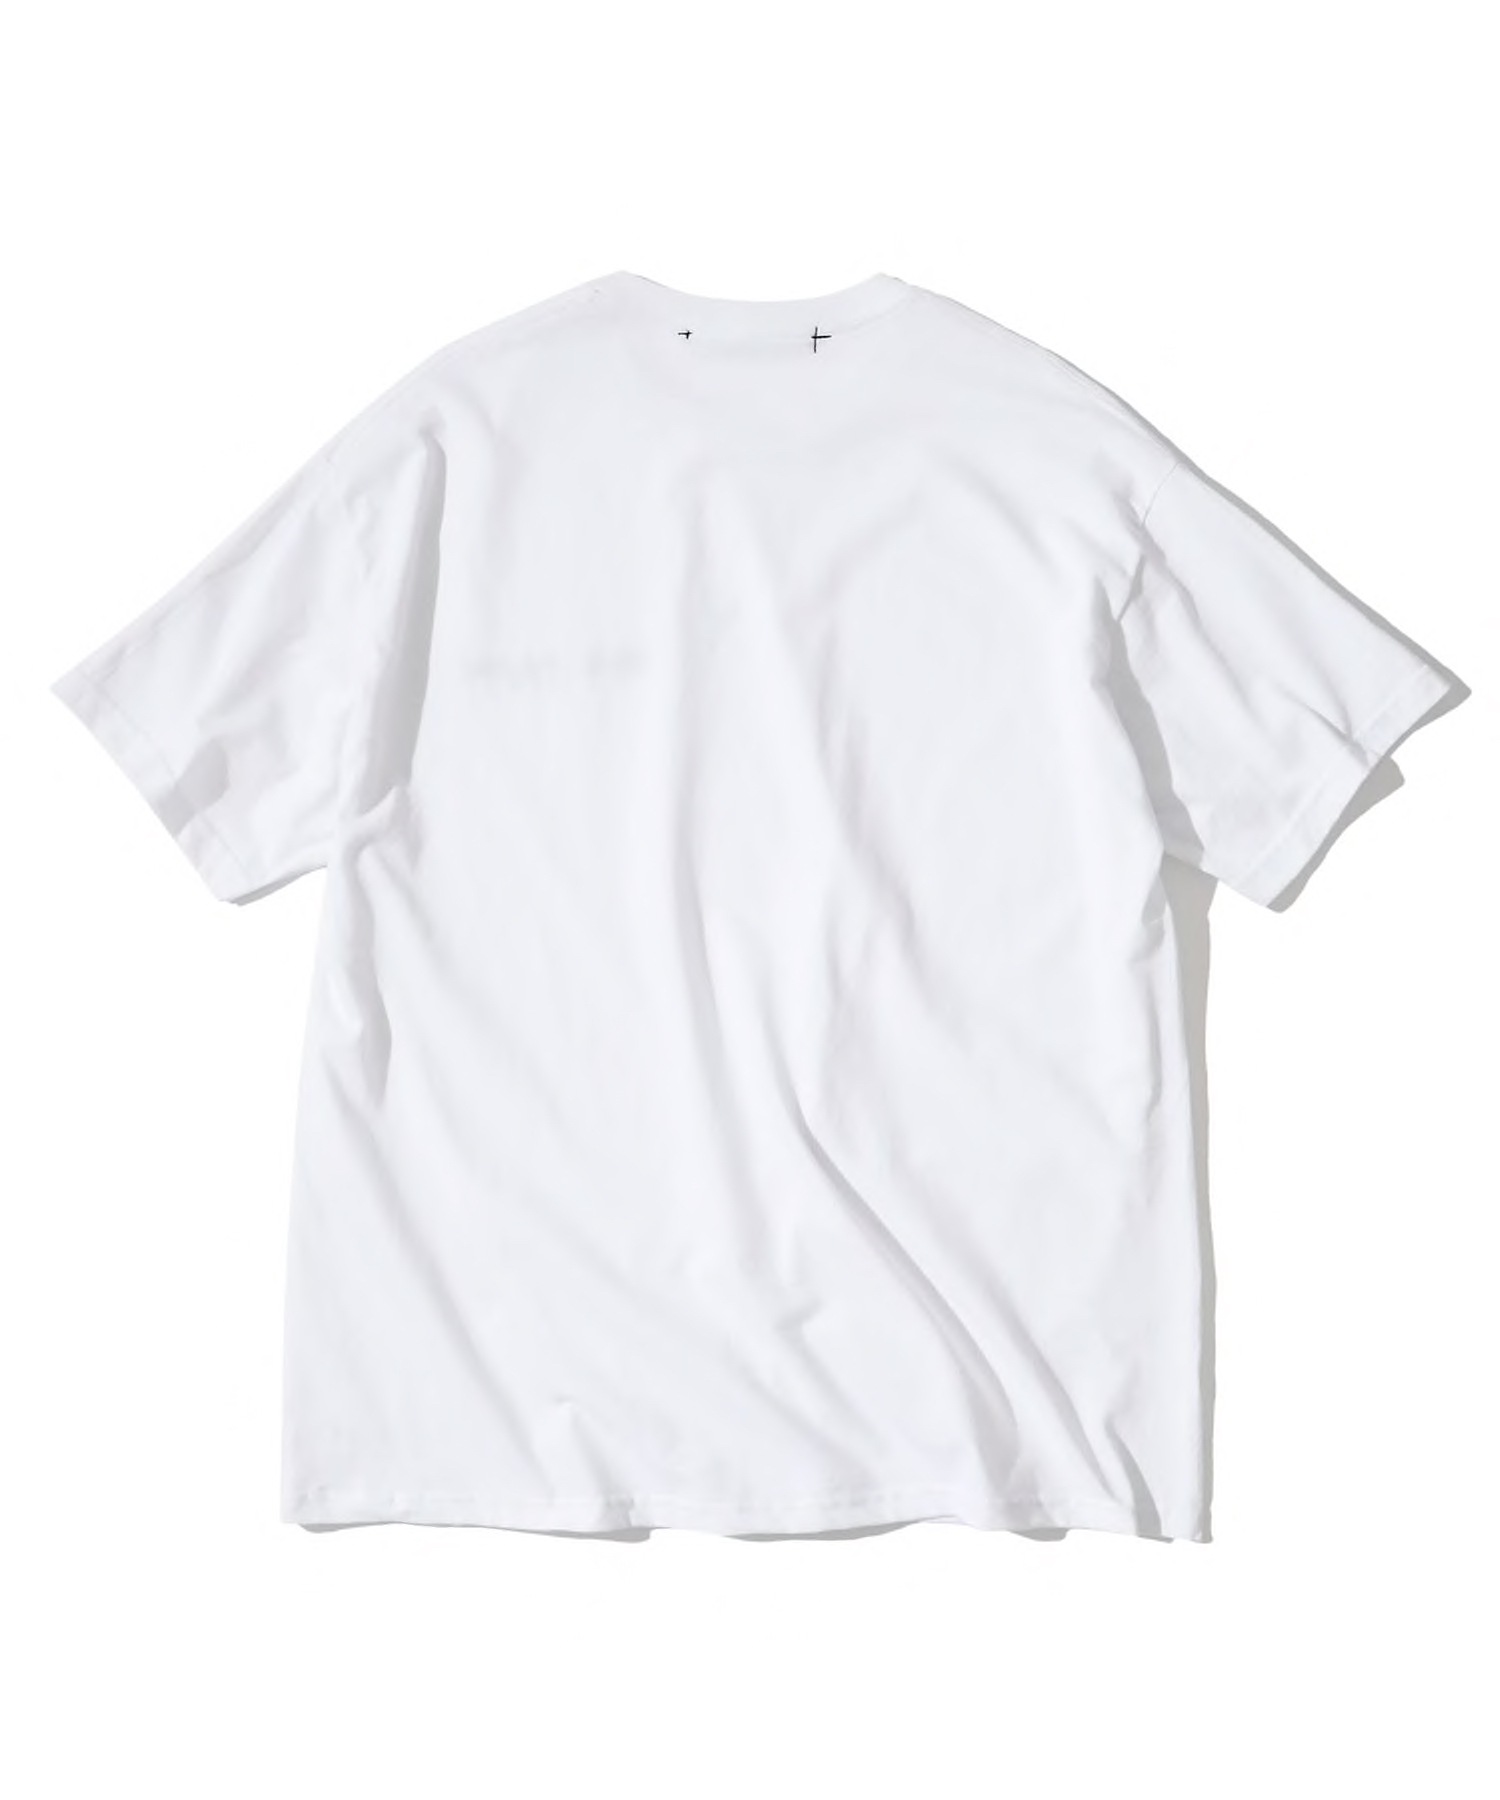 File:2021 armour Embroidery logo tee white back.jpg